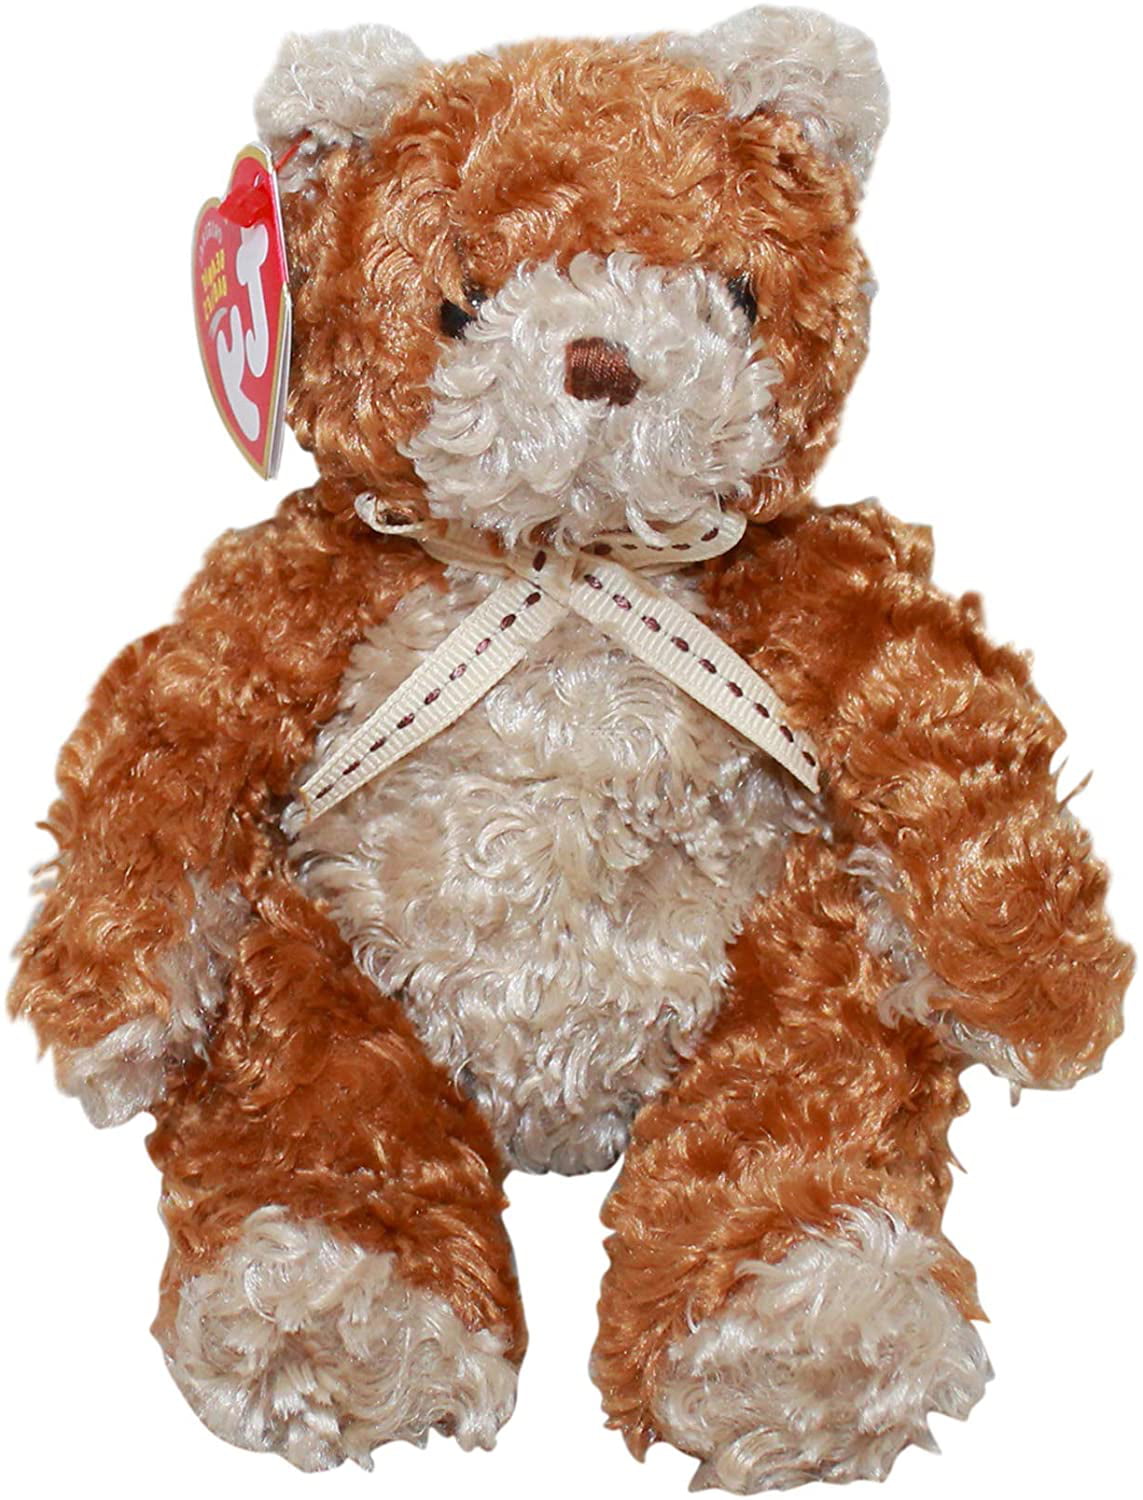 Details about   TY BEANIE BABY SANTA 